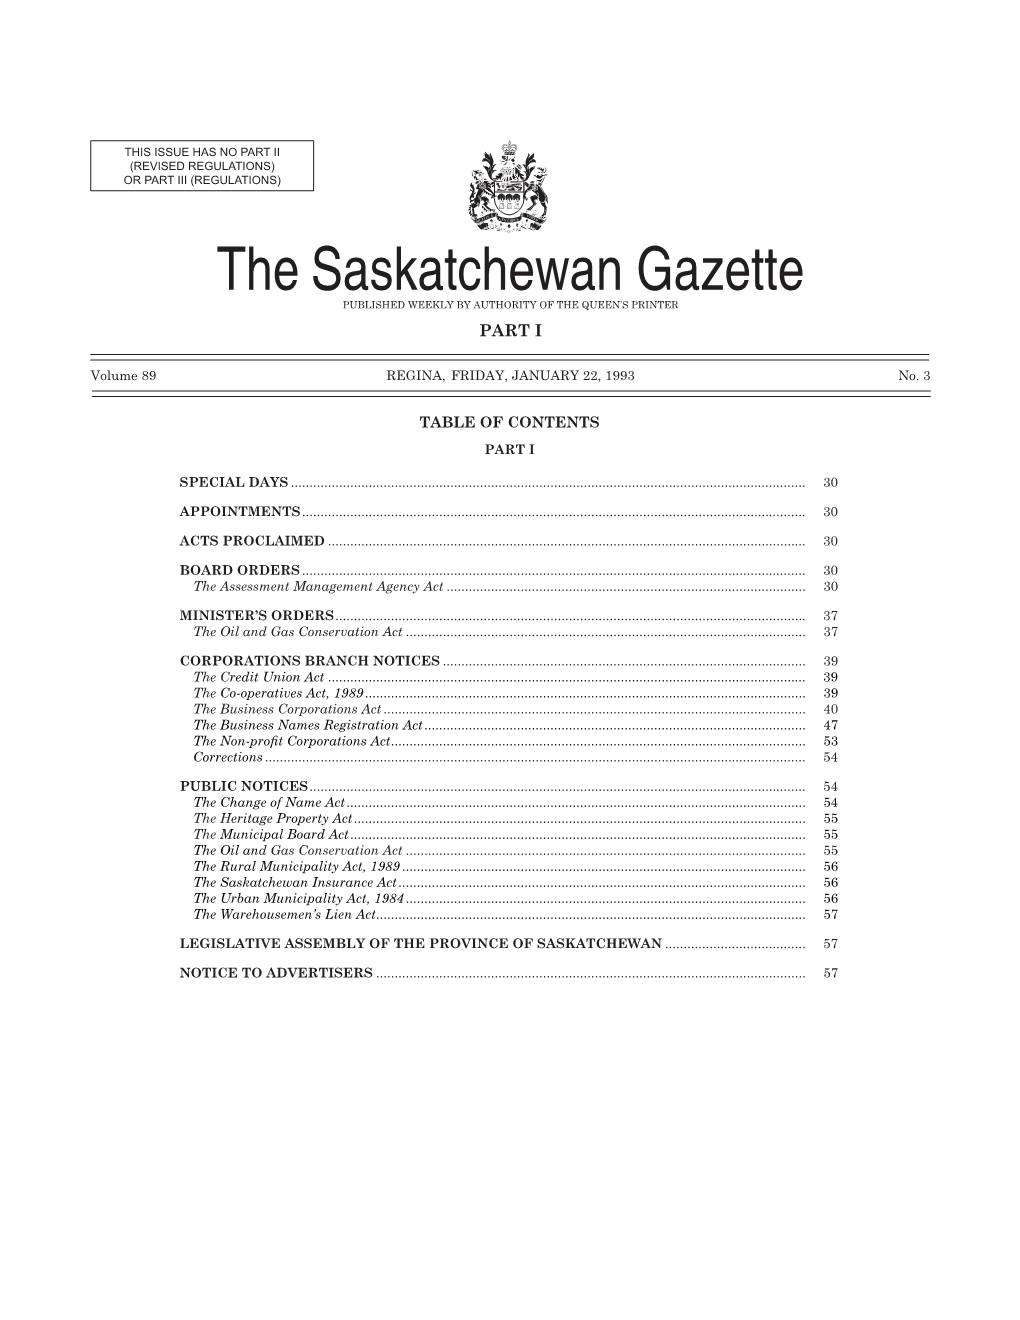 The Saskatchewan Gazette PUBLISHED WEEKLY by AUTHORITY of the QUEEN’S PRINTER PART I